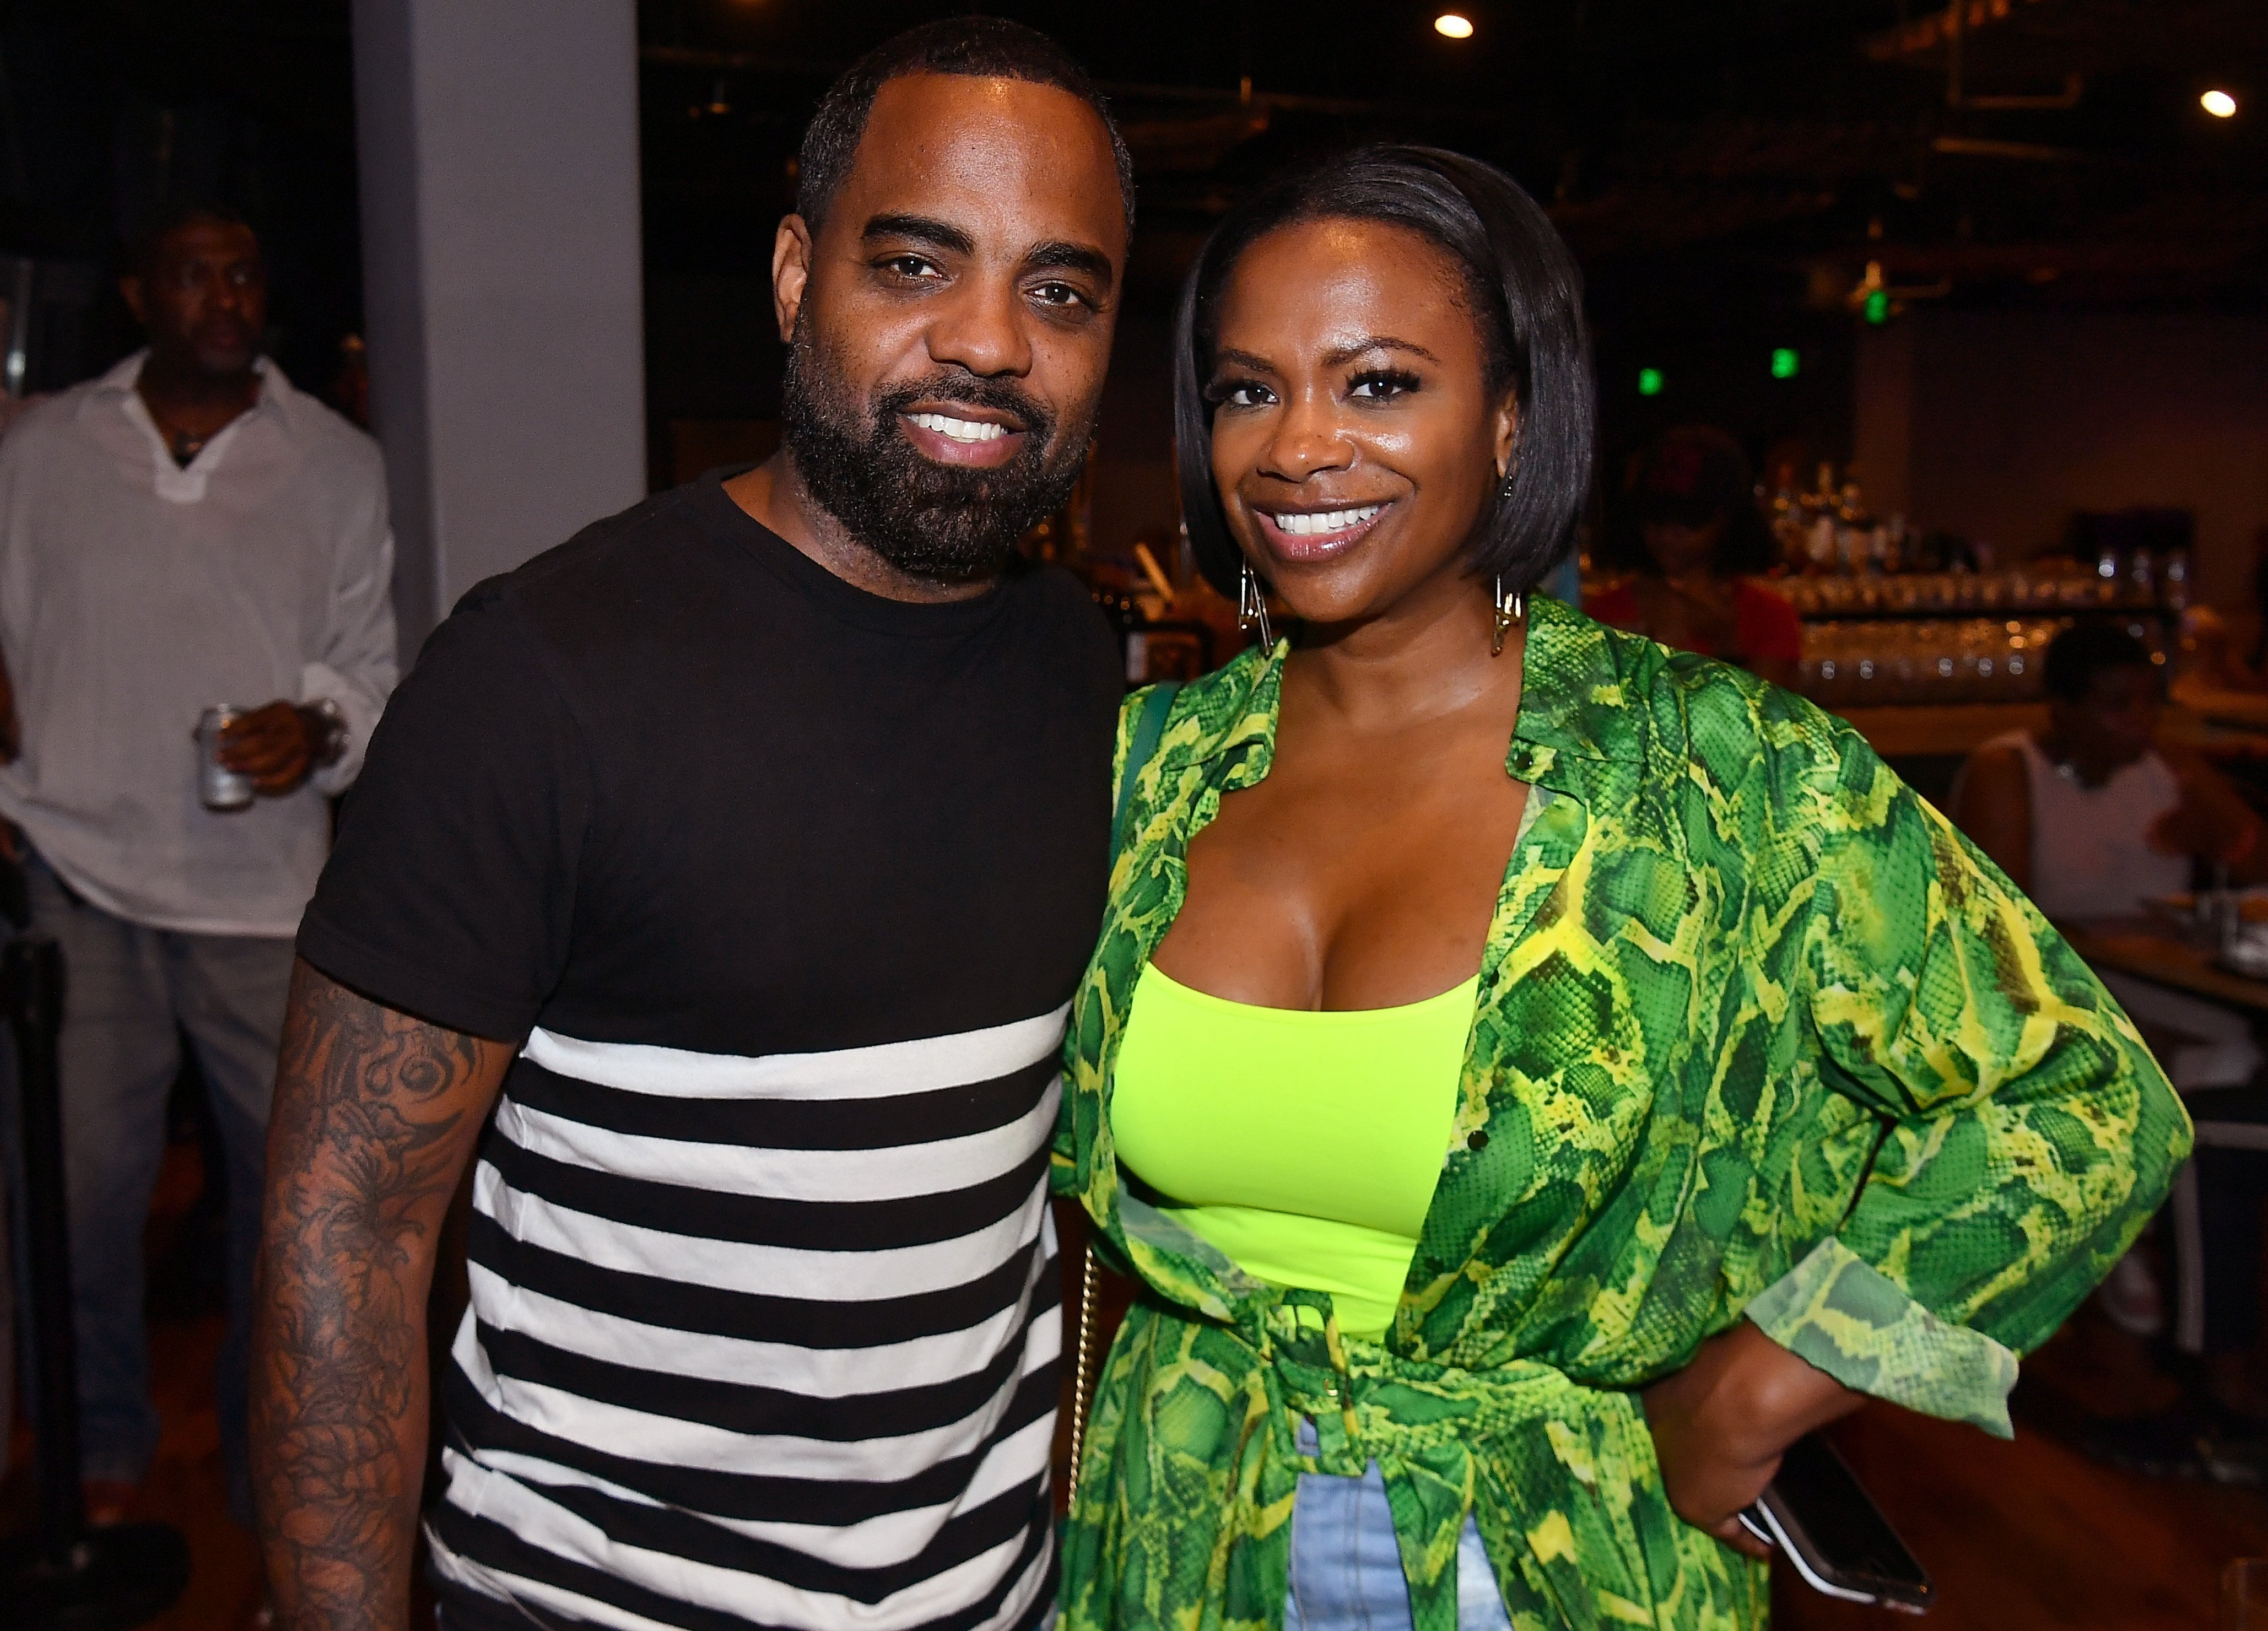 Kandi Burruss and husband Todd Tucker pose in a Majic 107.5 event in Atlanta in September 2019. | Photo: Getty Images